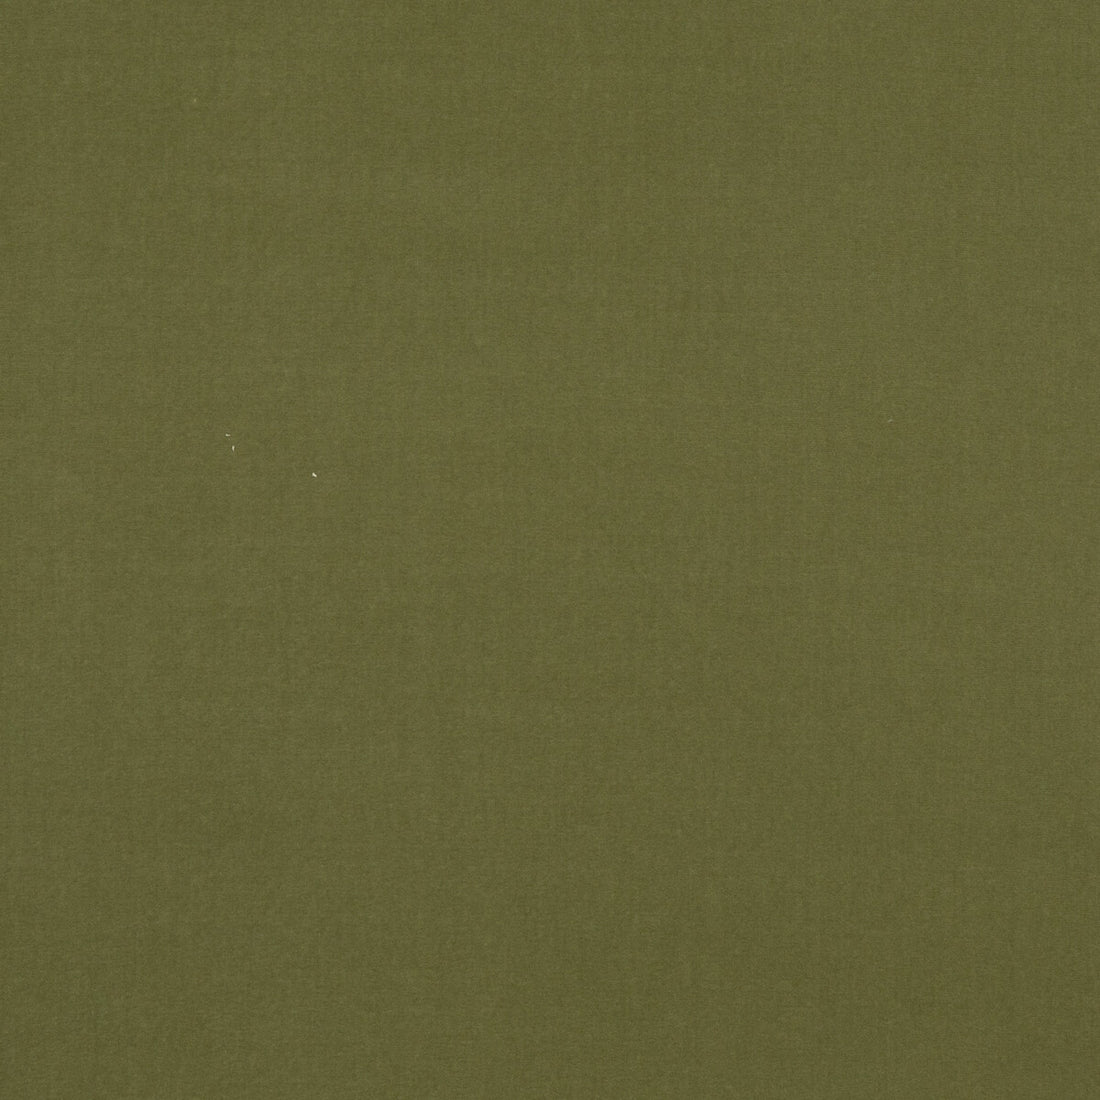 Baker House Velvet fabric in moss color - pattern BF10838.795.0 - by G P &amp; J Baker in the Baker House Velvet collection